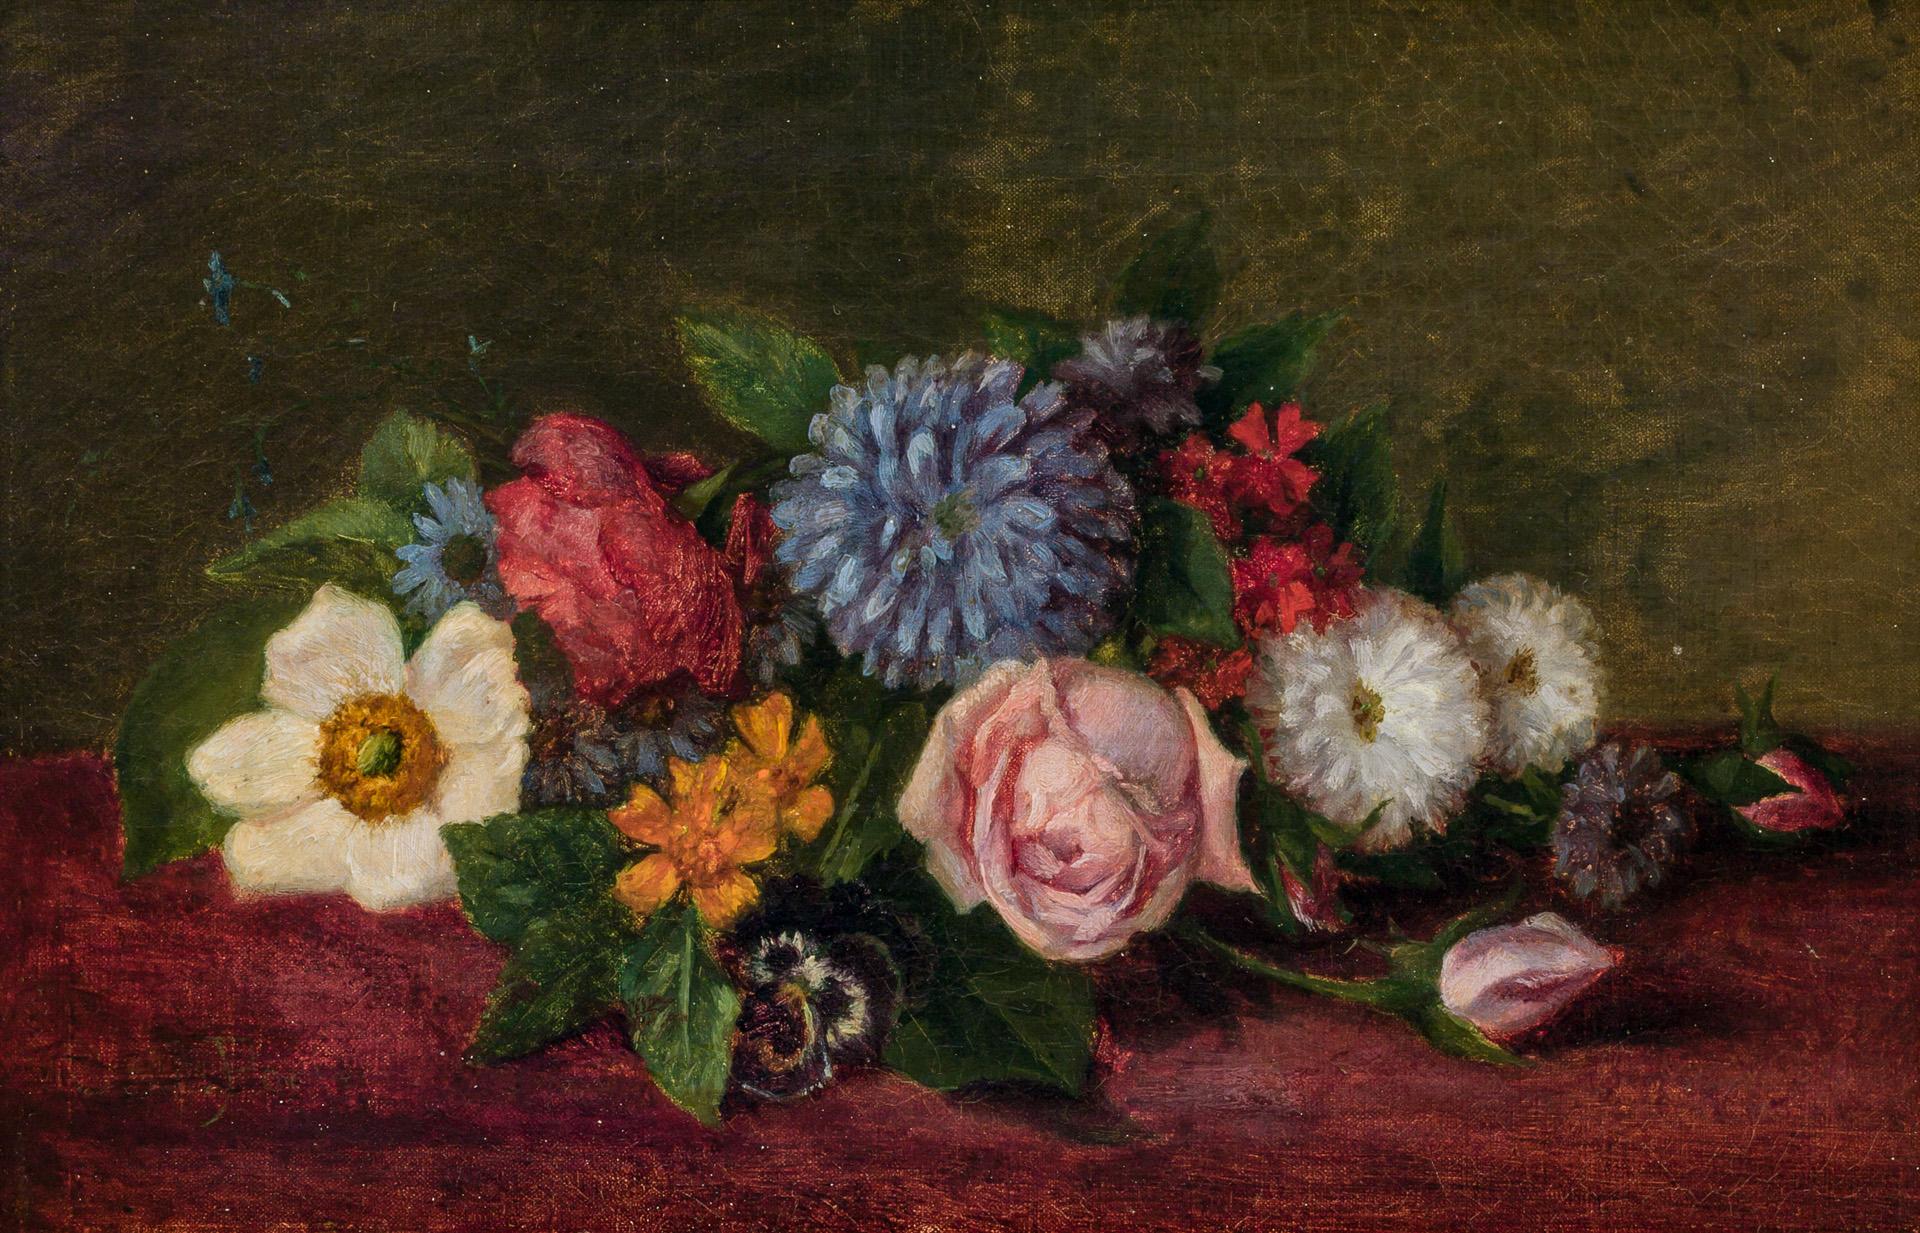 Nature morte florale by Charles Ethan Porter - Vers 1900 - 19 x 29 cm collection privée